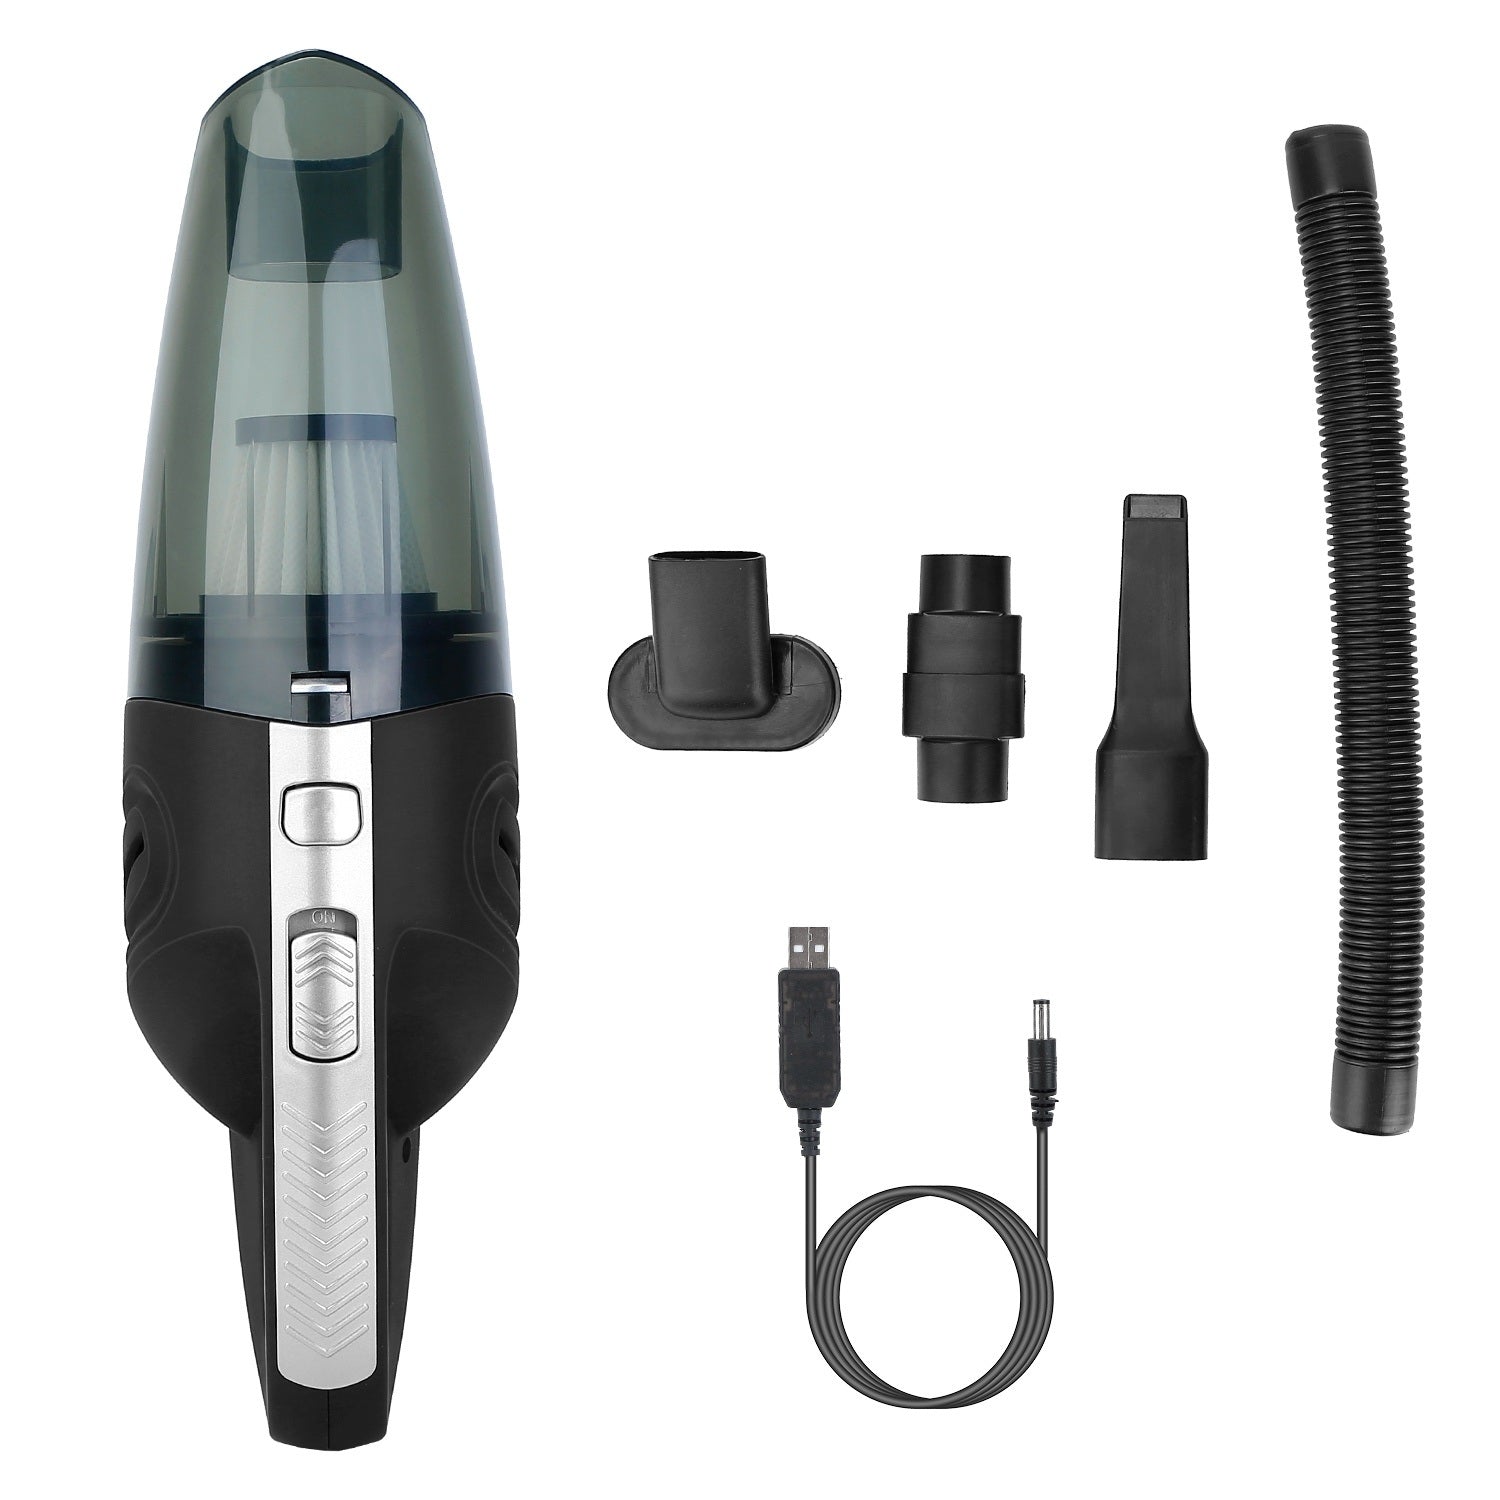 Car Handheld Vacuum Cleaner Cordless Rechargeable Hand Vacuum Portable Strong Suction Vacuum with various nozzles and USB charging cable, featuring graphics demonstrating its use in a car and on furniture.